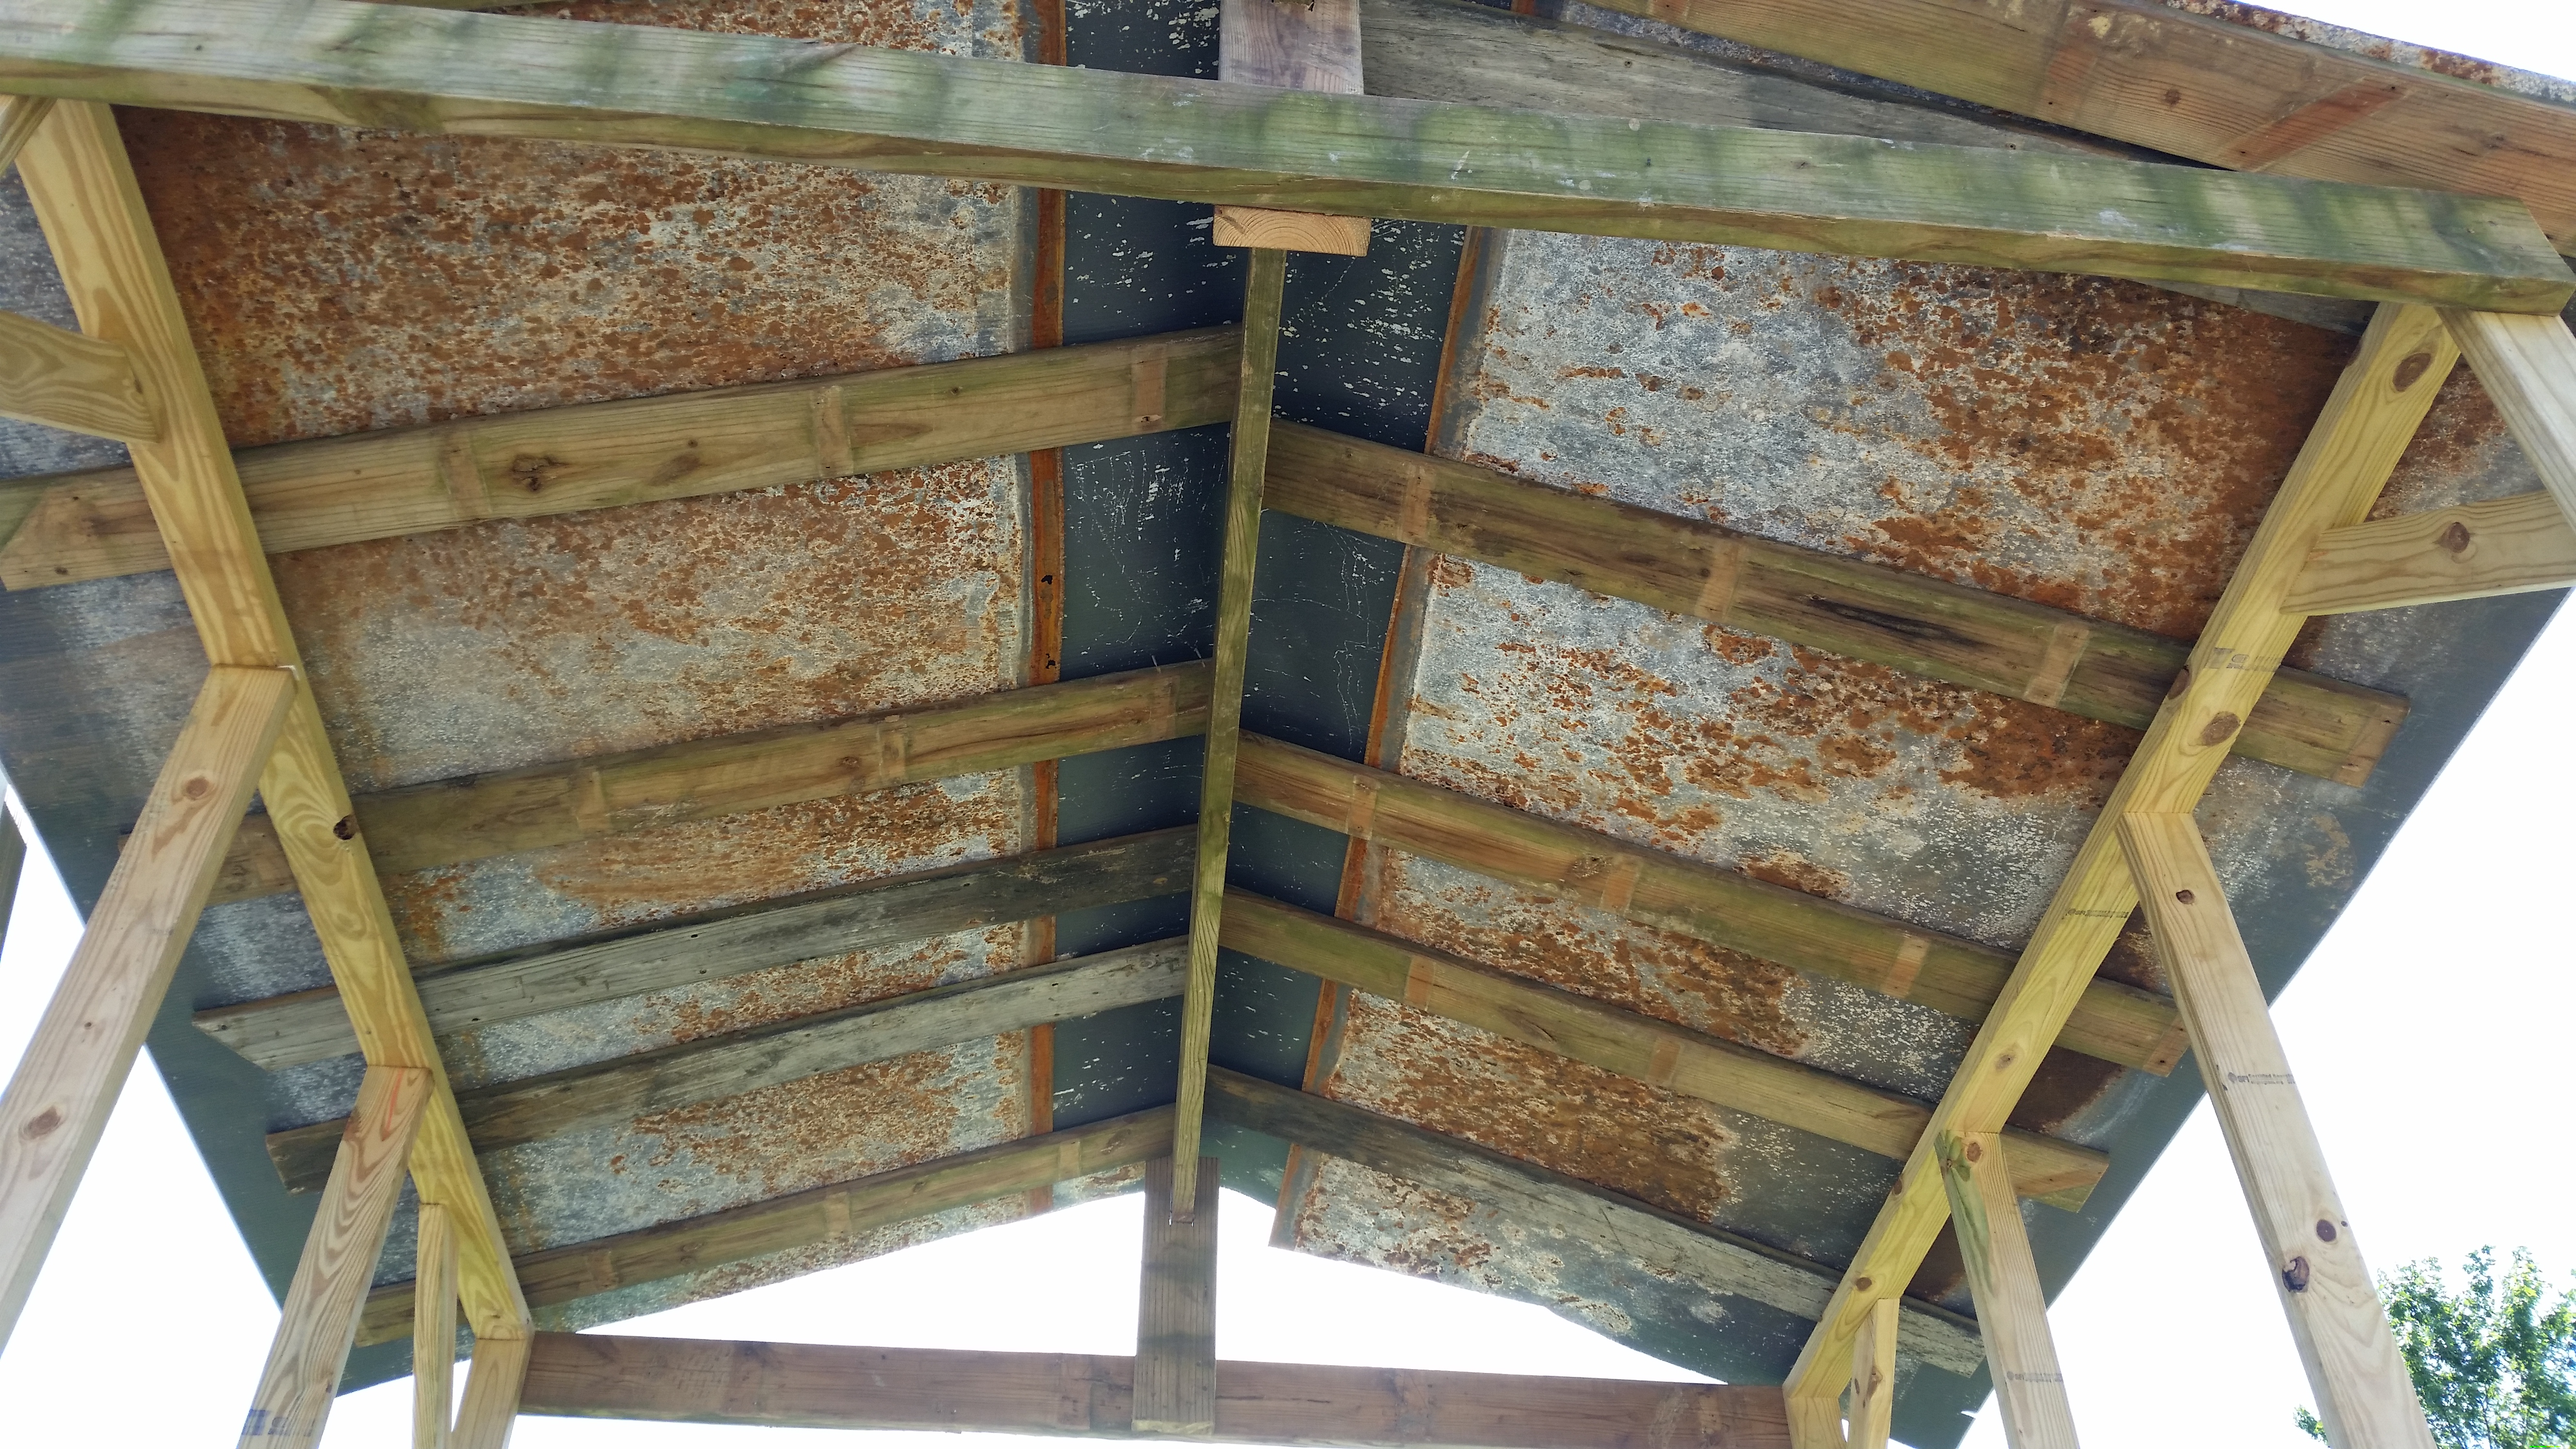 Good shot of roof from below, maded from deck boards and pool shell pieces